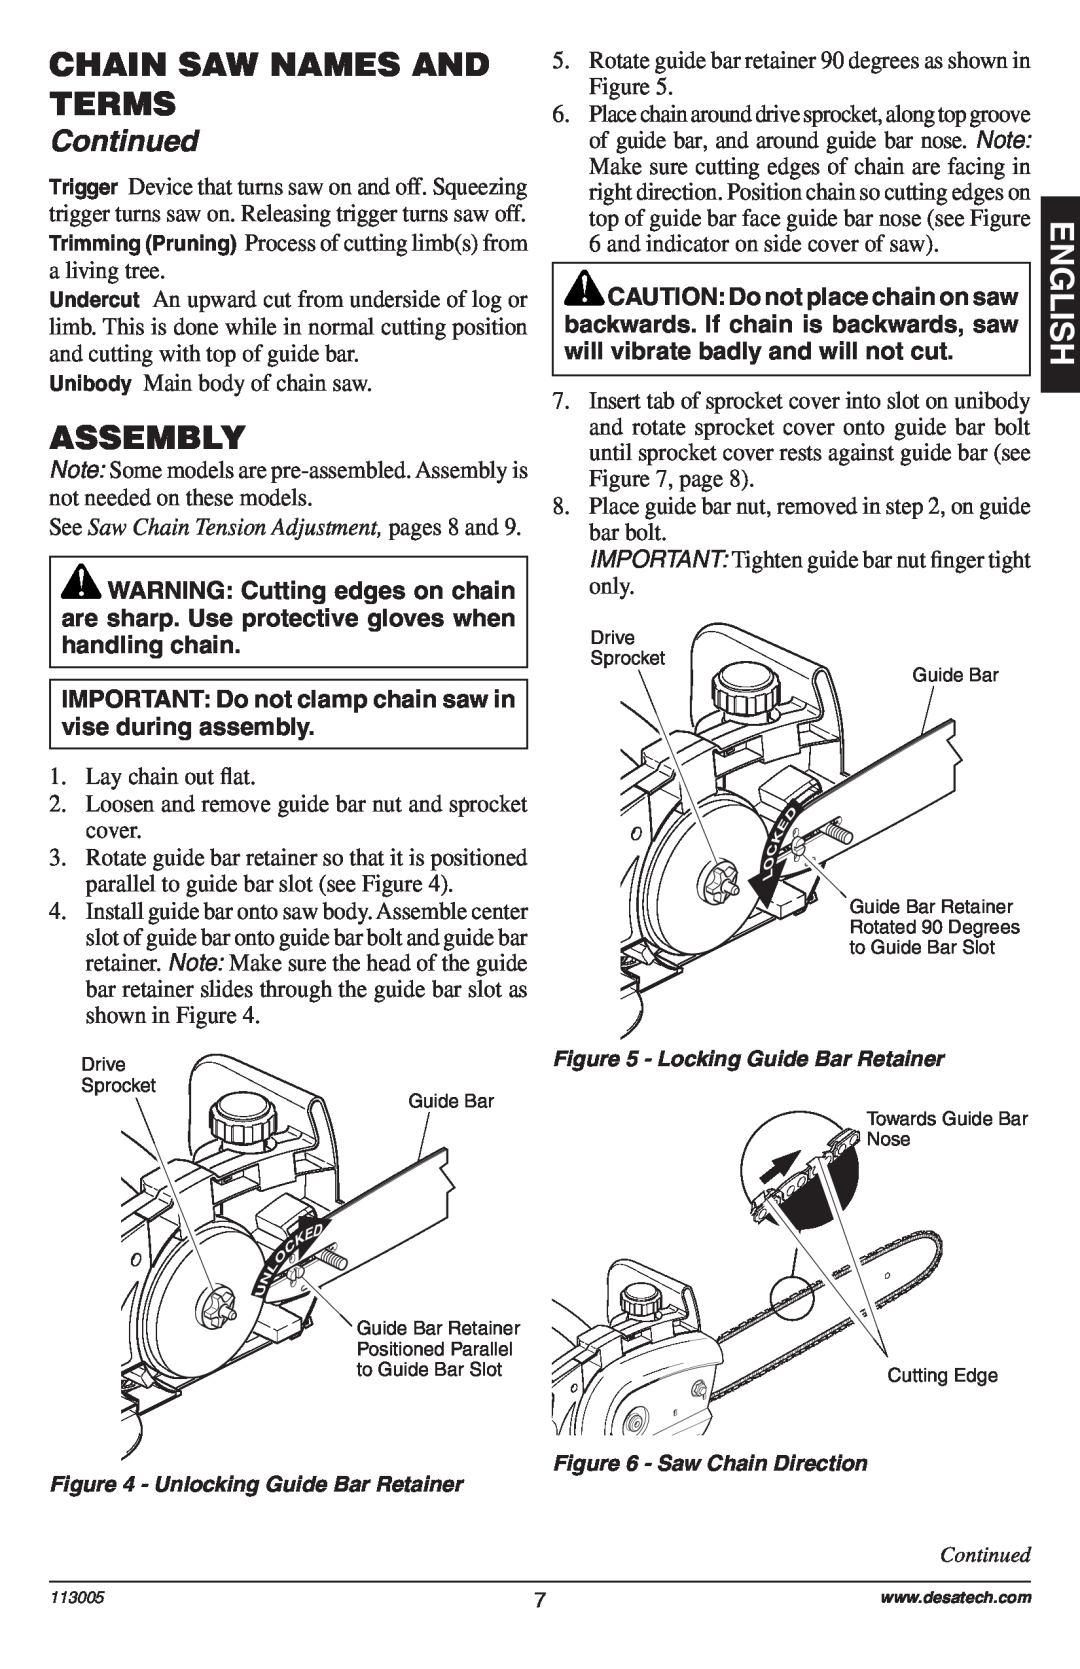 Remington Power Tools Electric Chain Saw owner manual Assembly, See Saw Chain Tension Adjustment, pages 8 and, Continued 